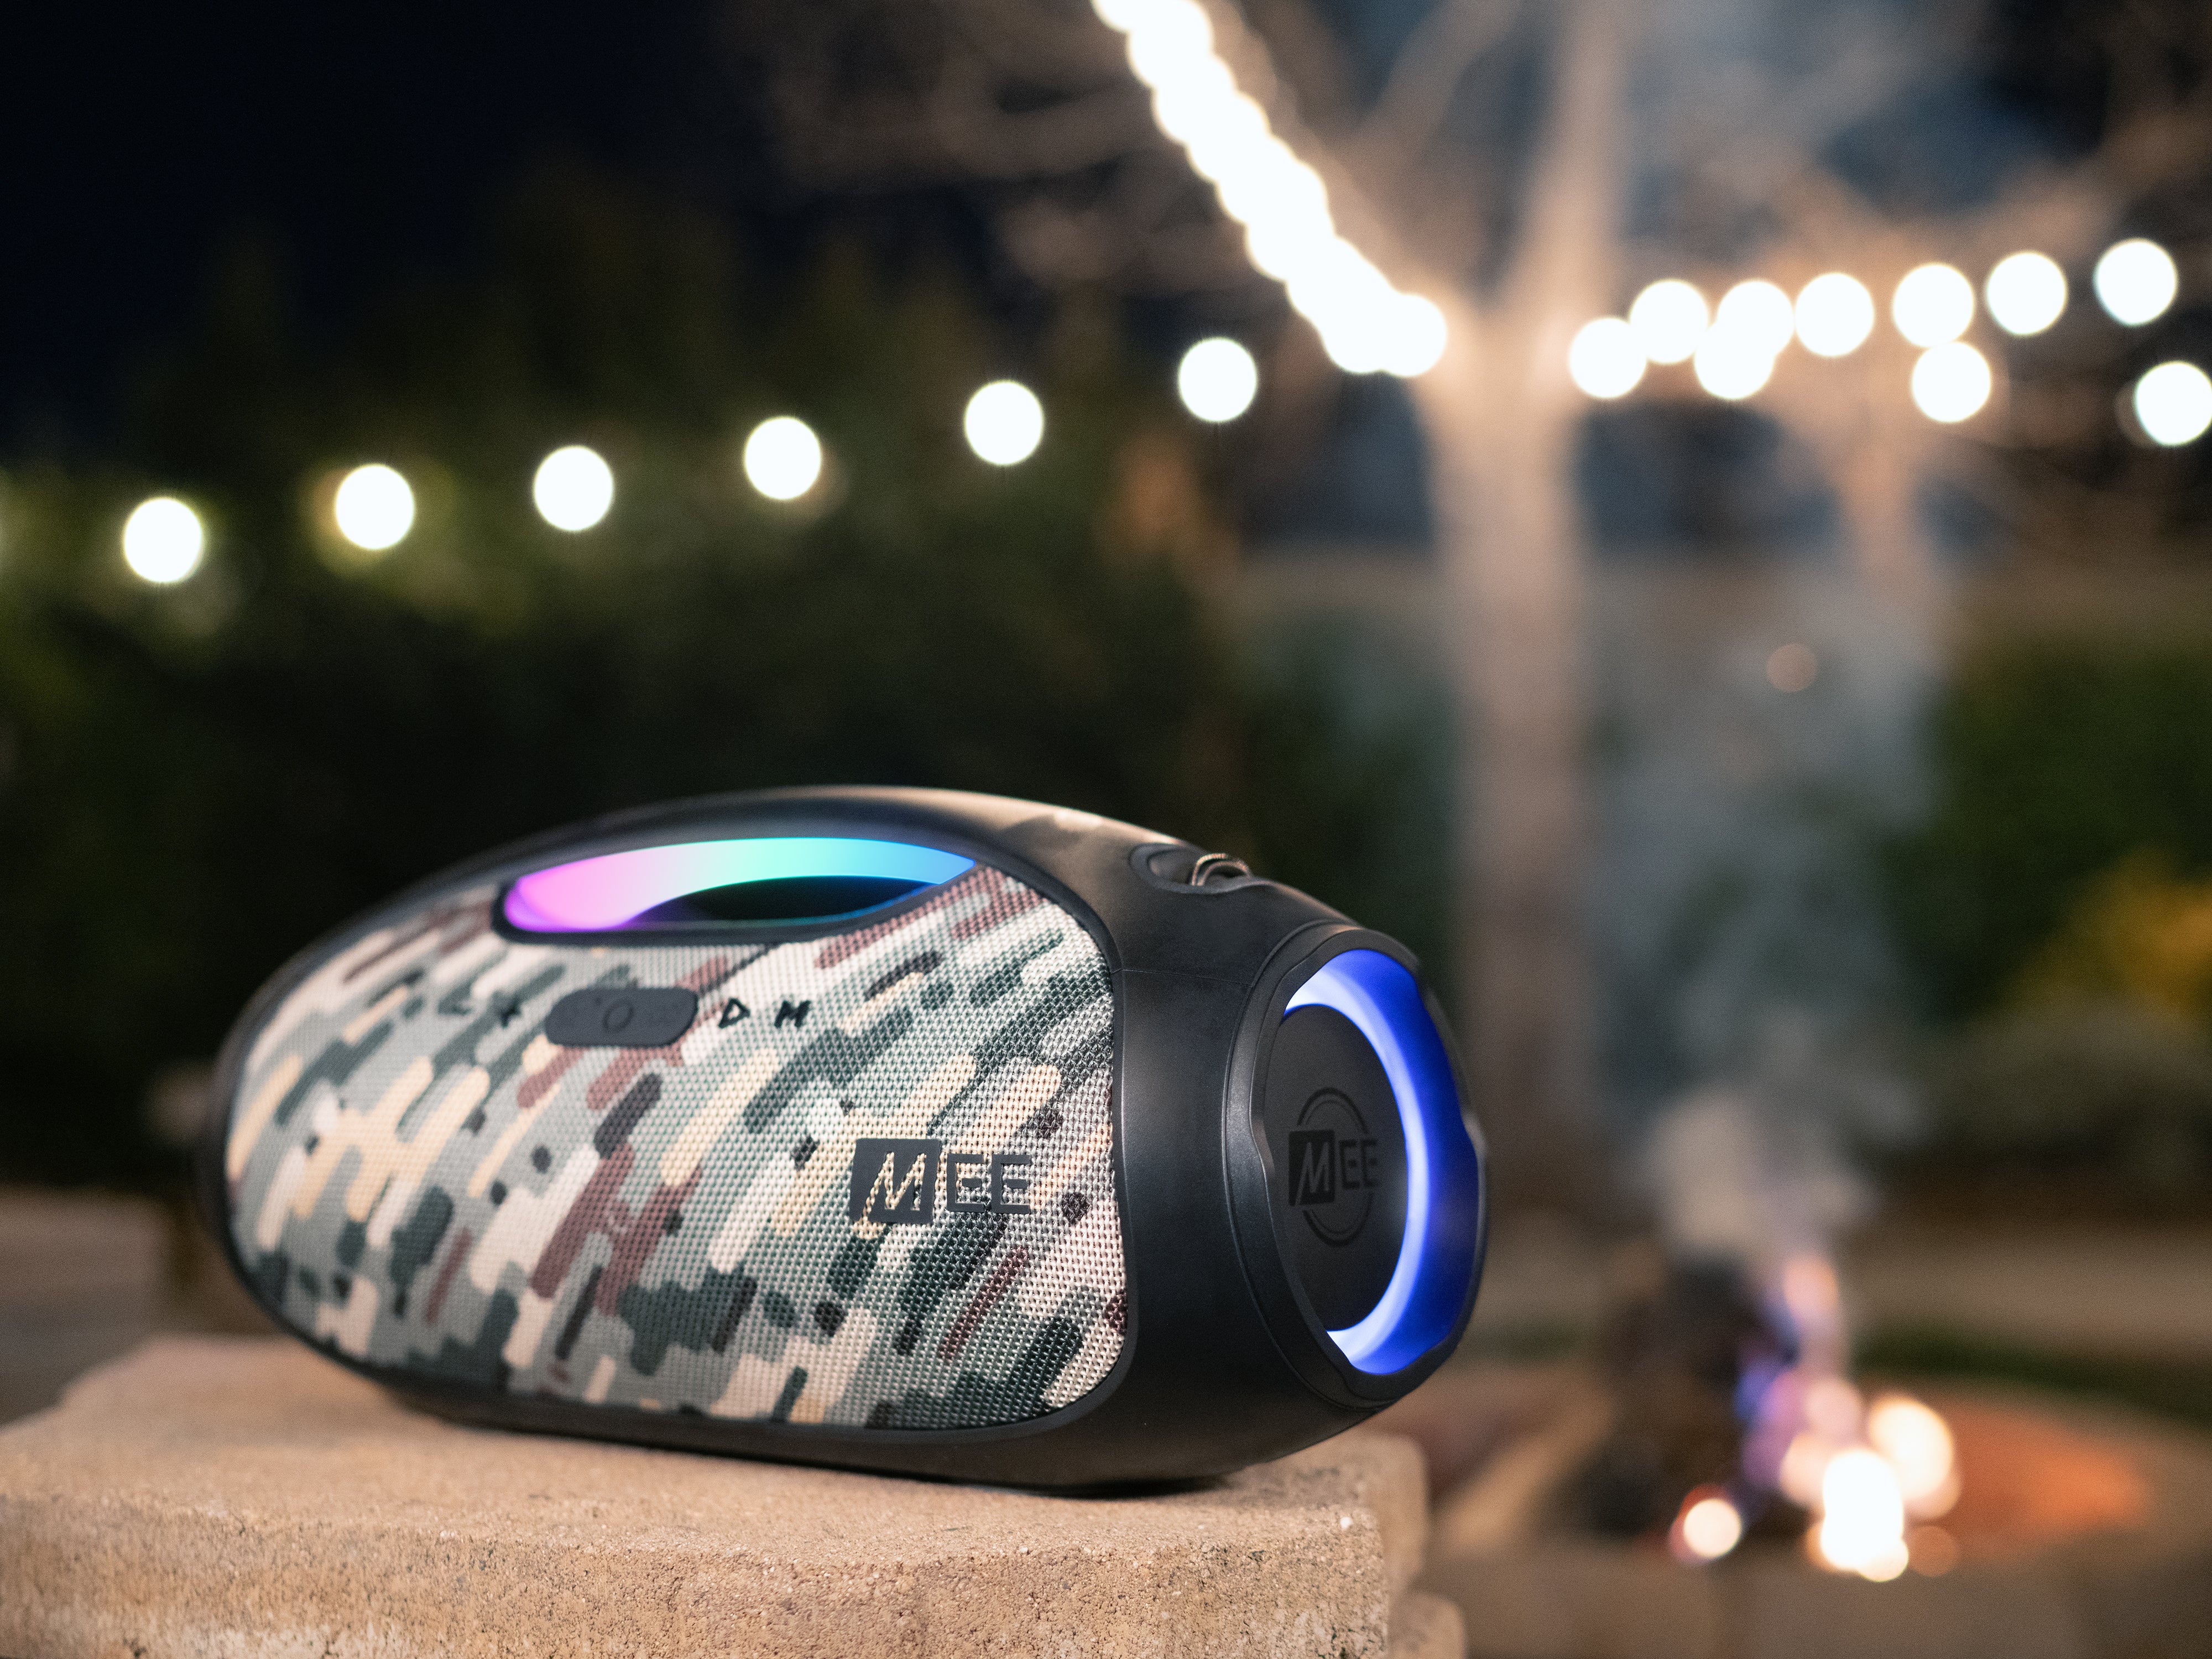 A portable speaker with a camouflage design sits on a concrete ledge, illuminated by ambient string lights and a soft glow from its circular led display, against a blurred nighttime garden backdrop.